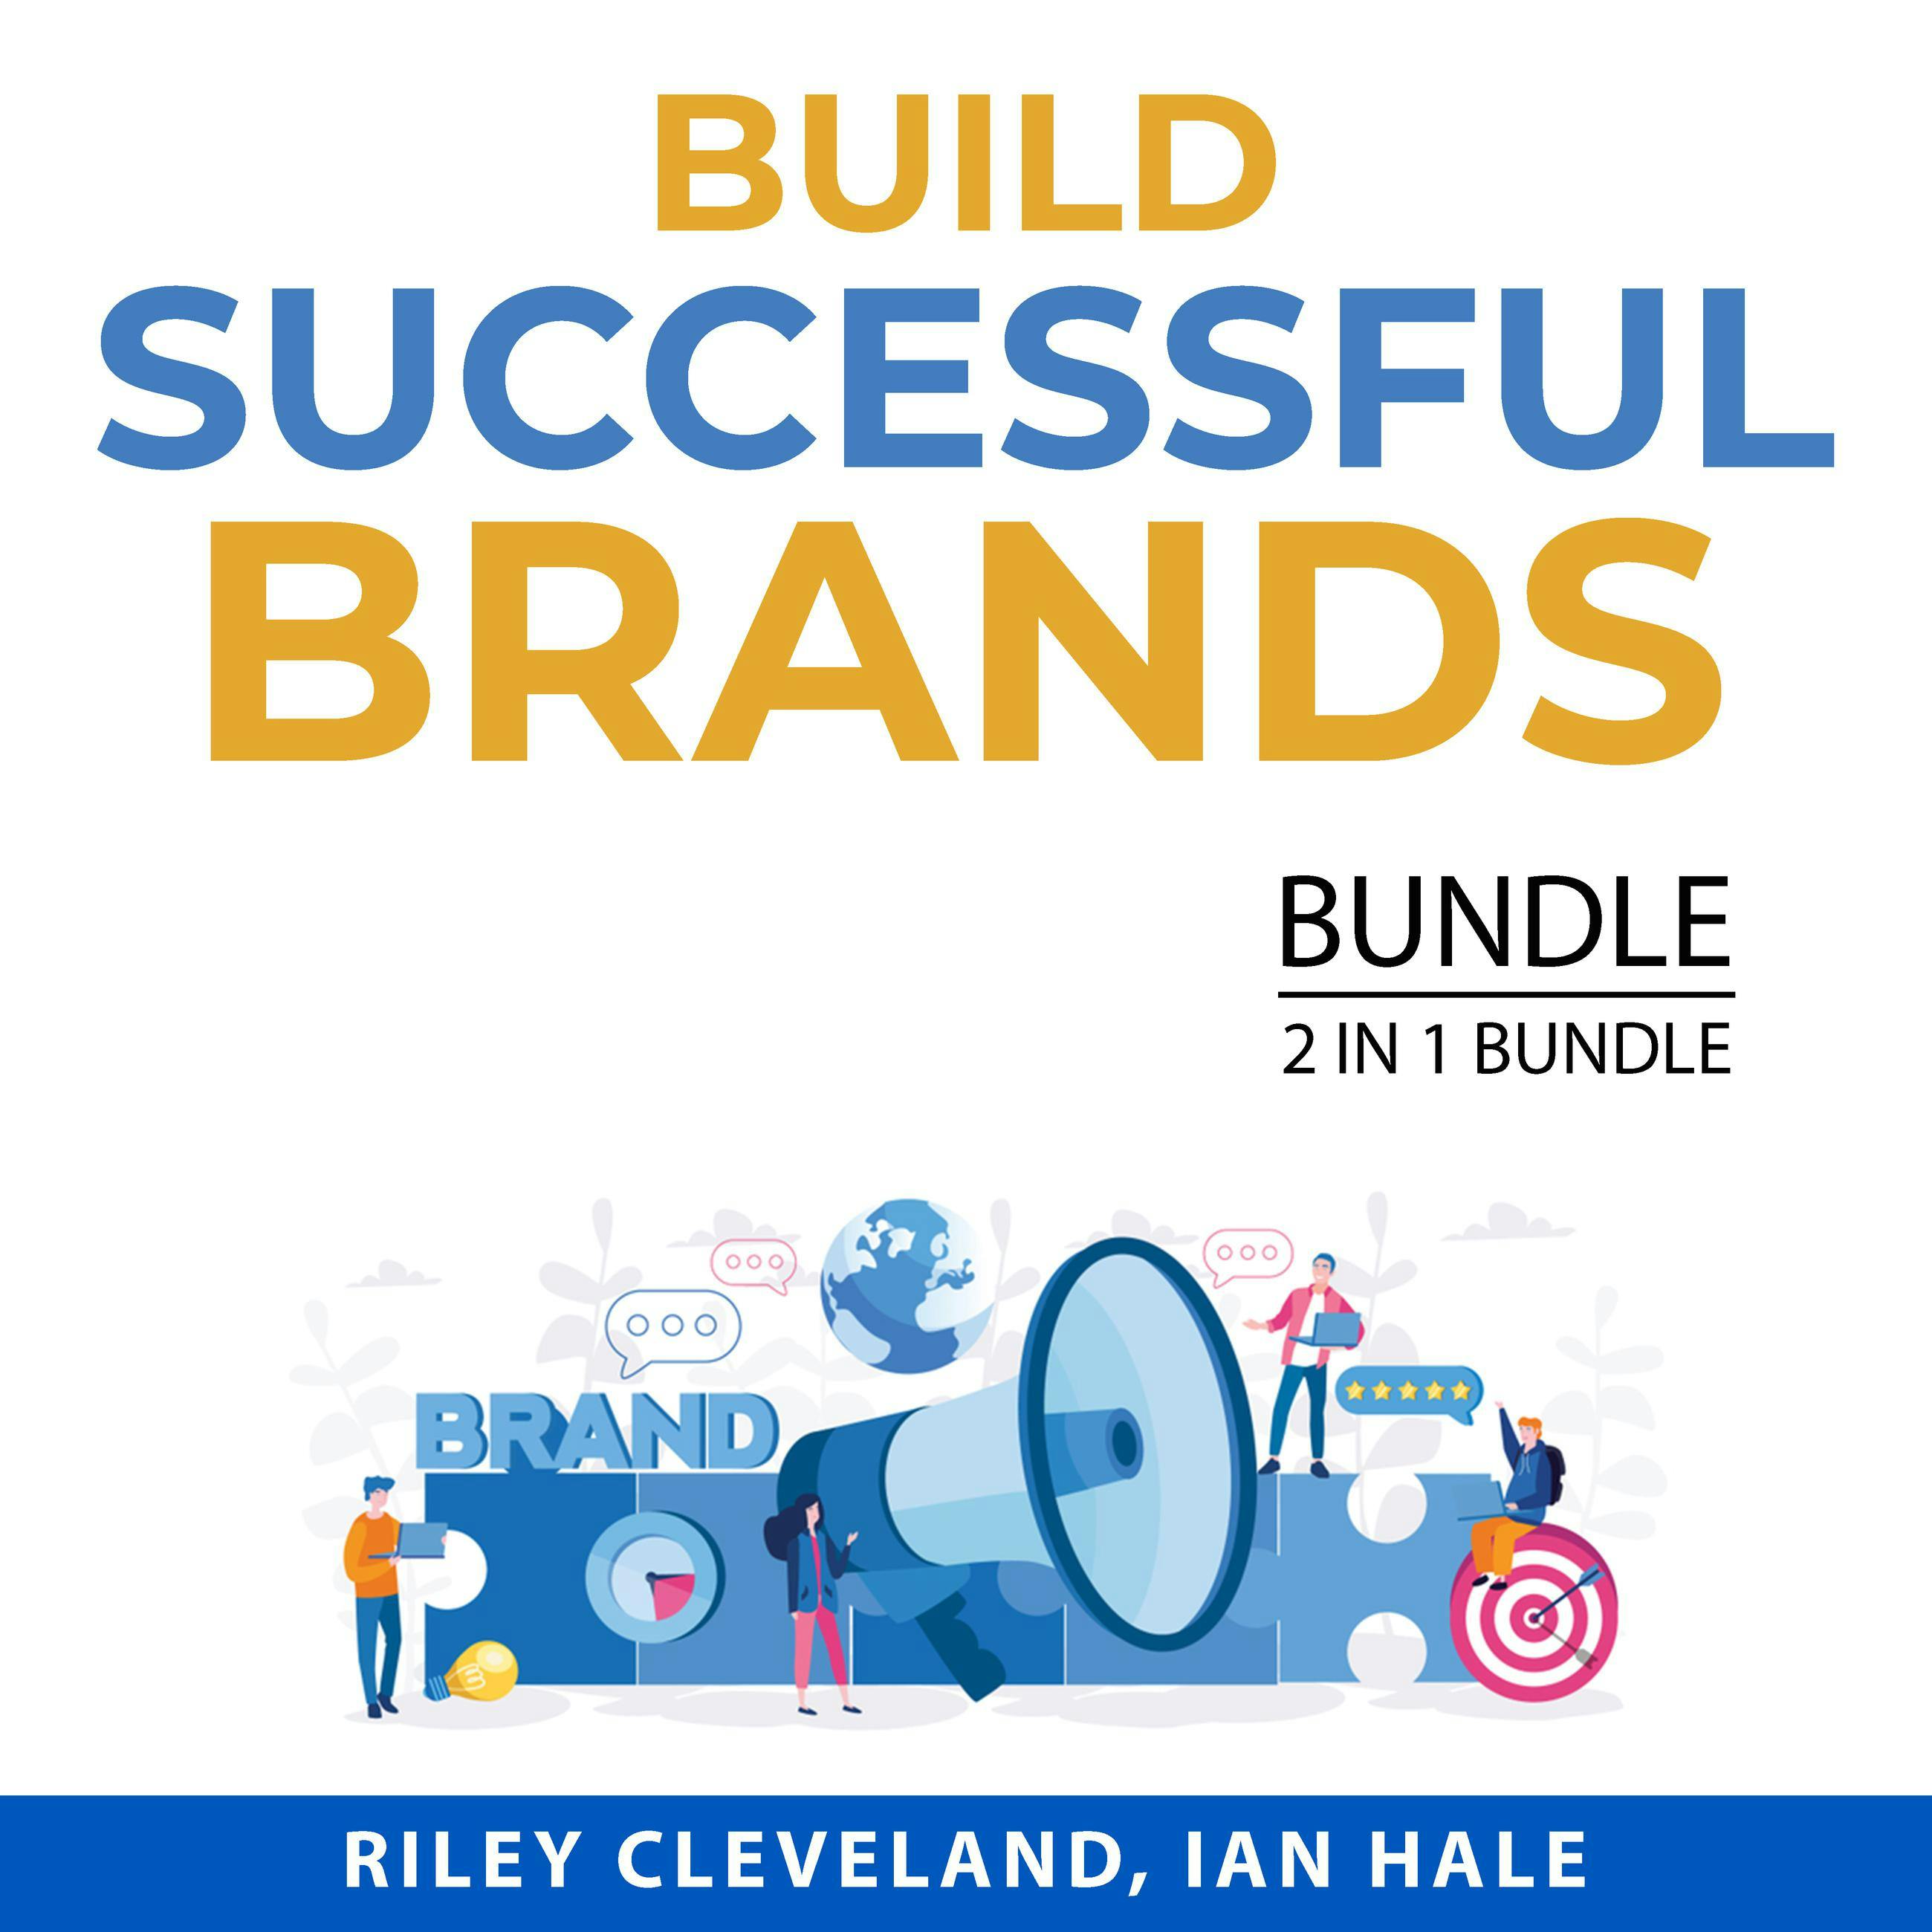 Build Successful Brands Bundle, 2 in 1 Bundle: Build Brand Authority and Branding Power - undefined